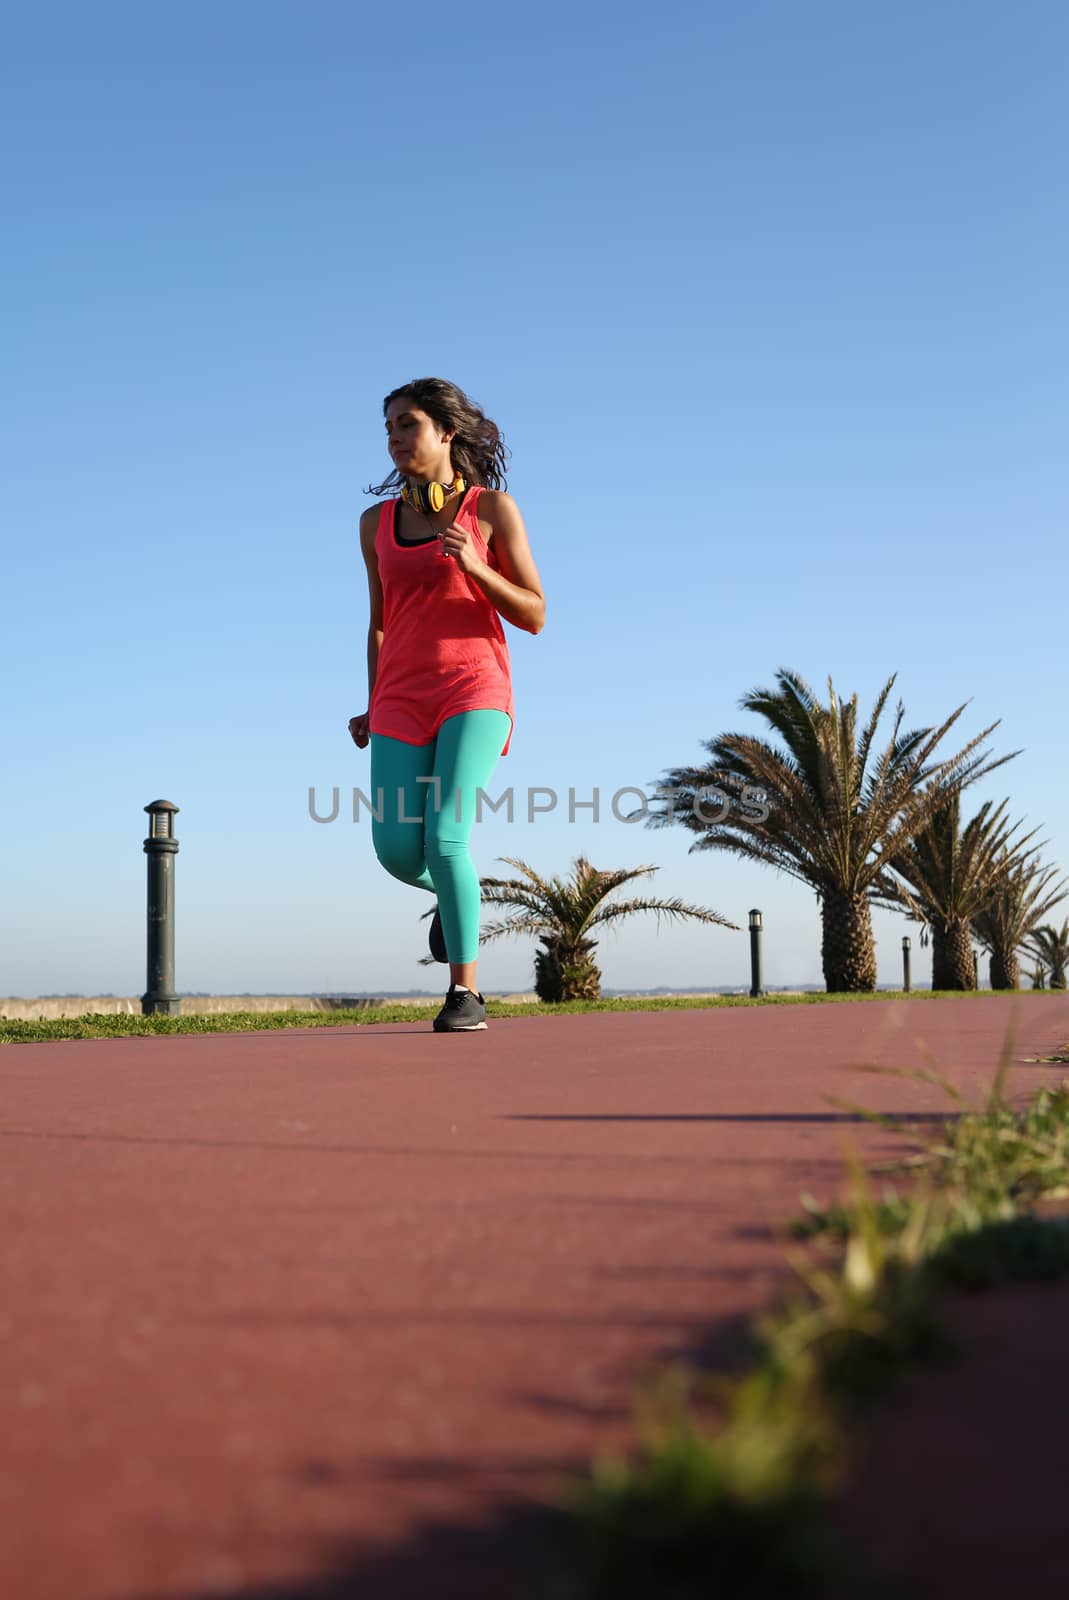 Fit woman running in the city park